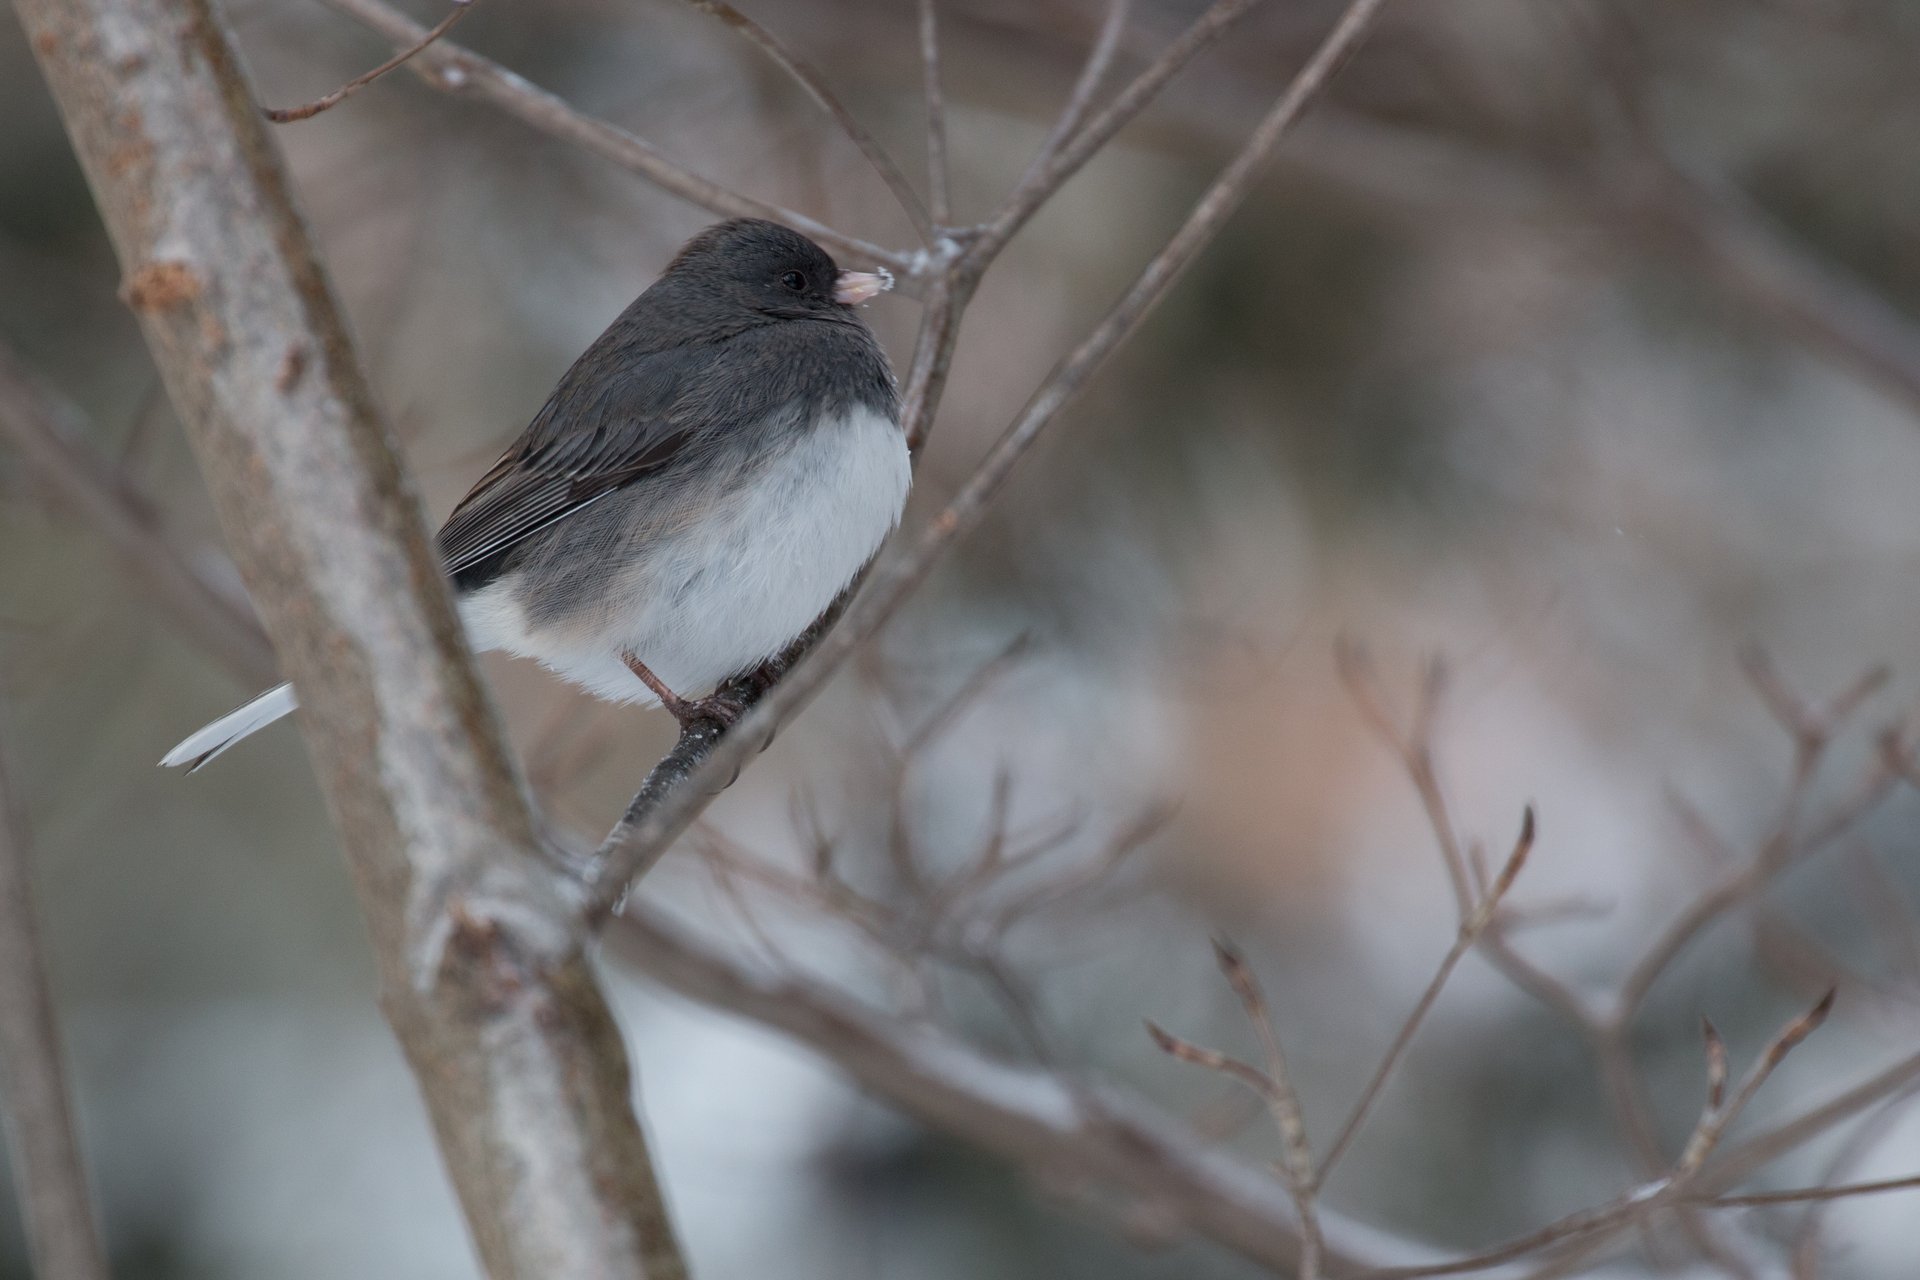 Small grey and white bird perched on branch